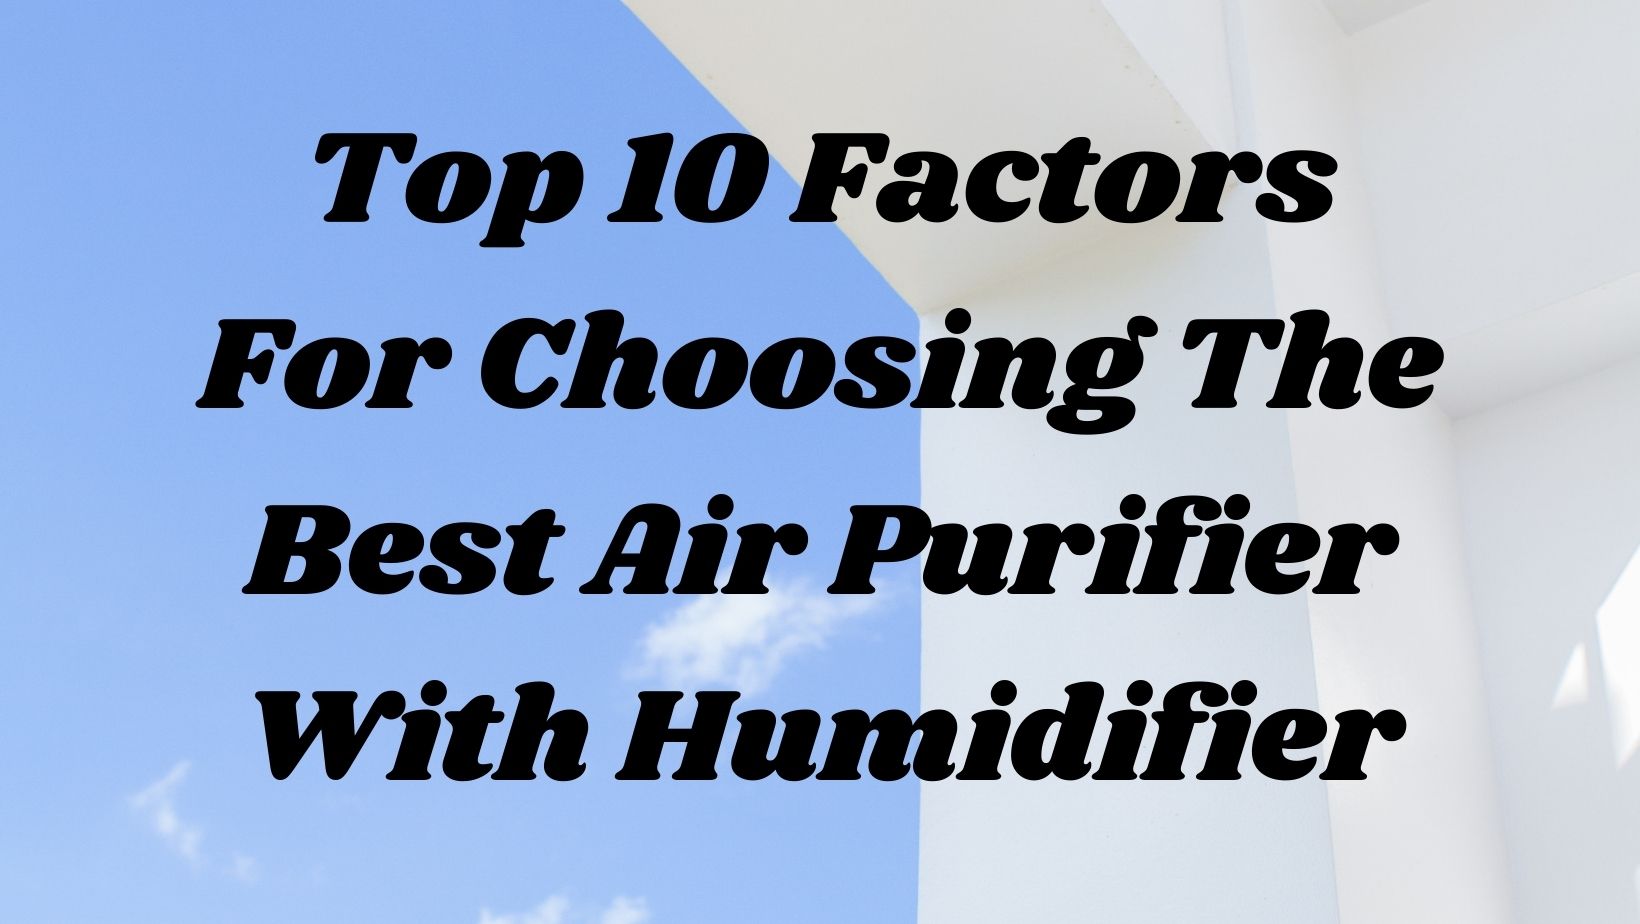 The Best Air Purifier With Humidifier